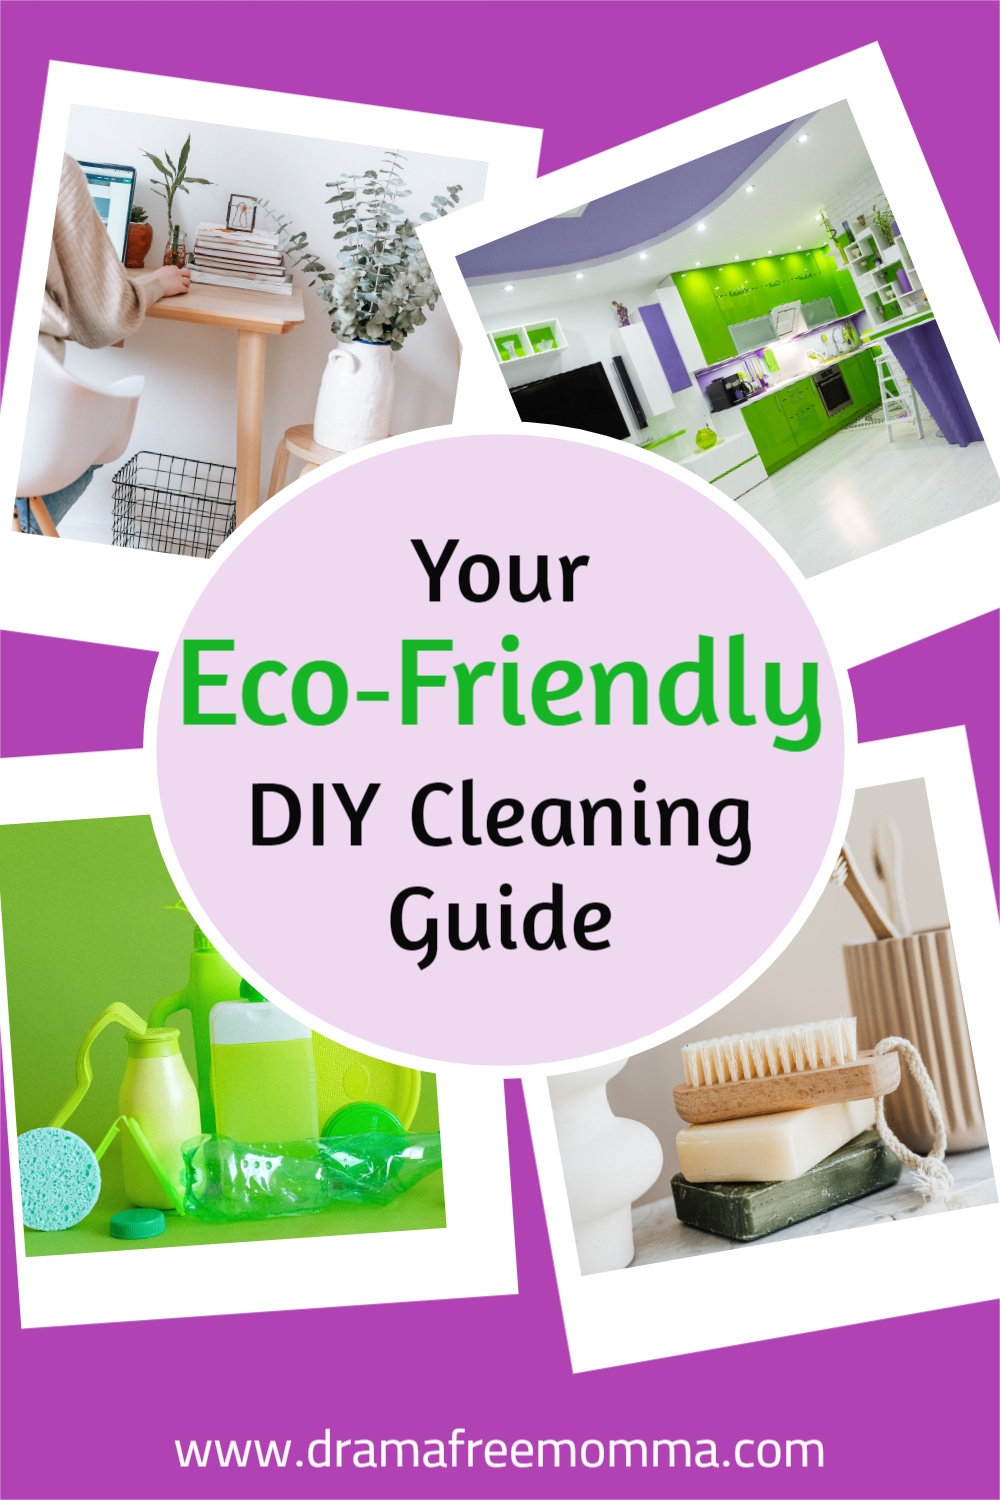 eco-friendly DIY cleaning recipes, diy daily shower spray with essential oils, homemade rug cleaner recipe, homemade lysol wipes recipe, swiffer solution diy, essential oil disinfectant recipe, biodegradable kitchen wipes, lemon cleaner recipe, homemade cleaning spray baking soda, homemade white vinegar cleaner, homemade furniture polish without vinegar, homemade oxiclean recipe, natural diy shower cleaner, homemade cleaner with lemon